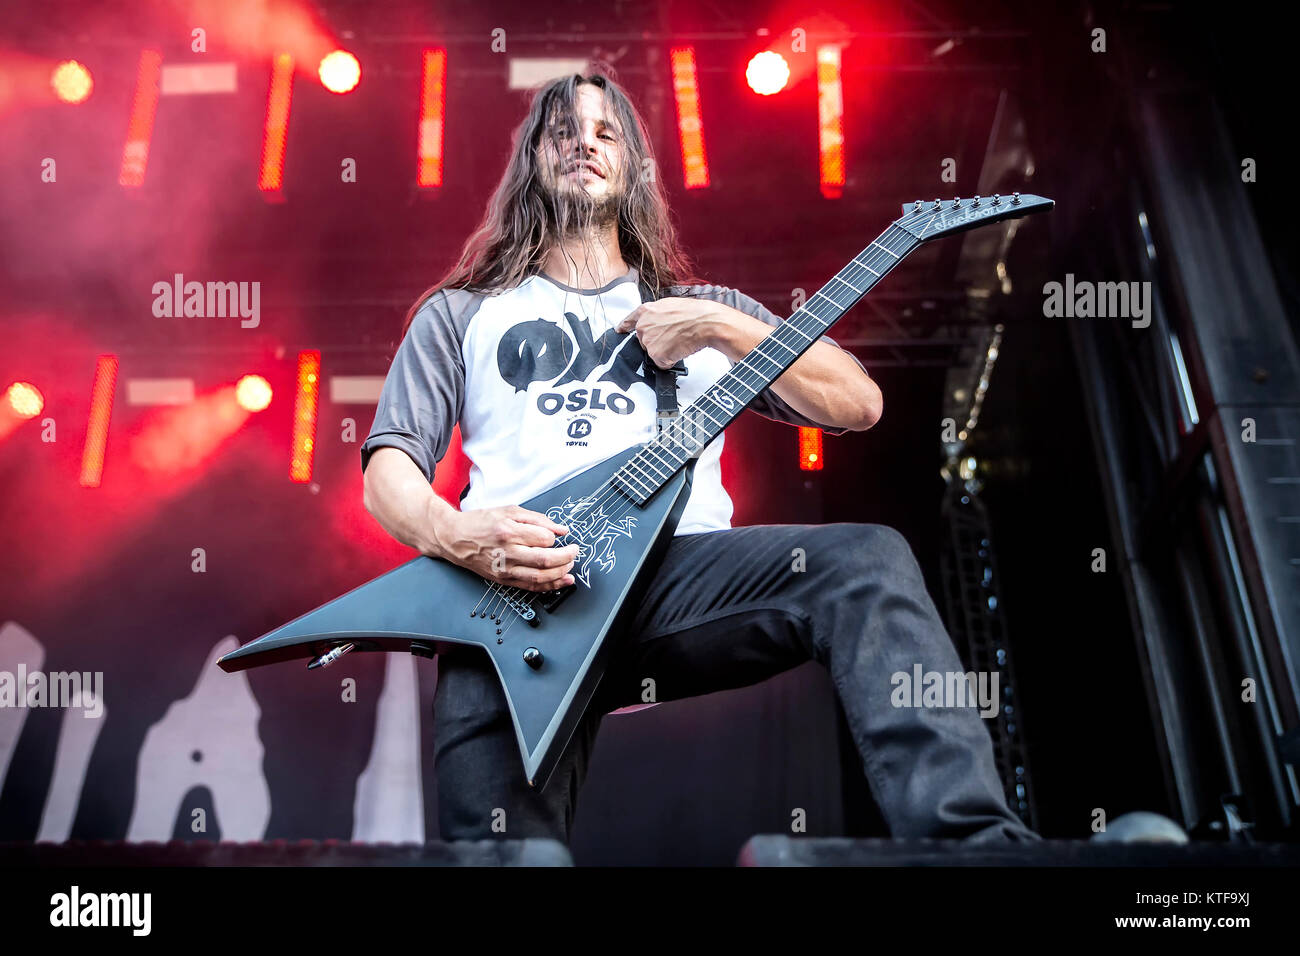 The French death metal band Gojira performs a live concert at the Norwegian music festival Øyafestivalen 2014. Here guitarist Christian Andreu is seen live on stage. Norway, 08/08 2014. Stock Photo